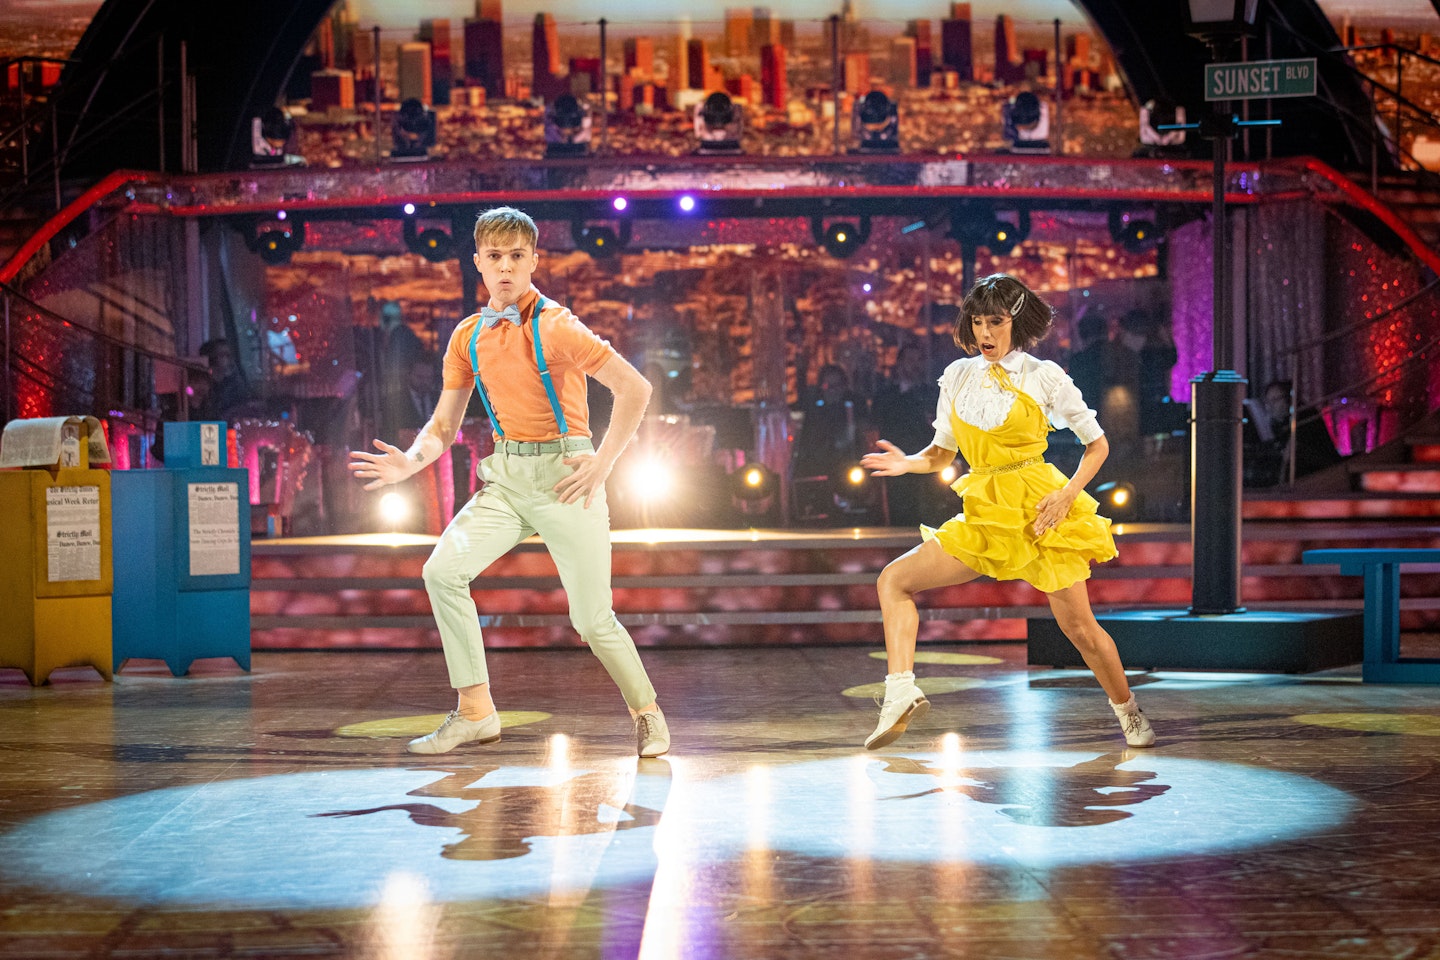 HRVY Janette Manrara Strictly Come Dancing